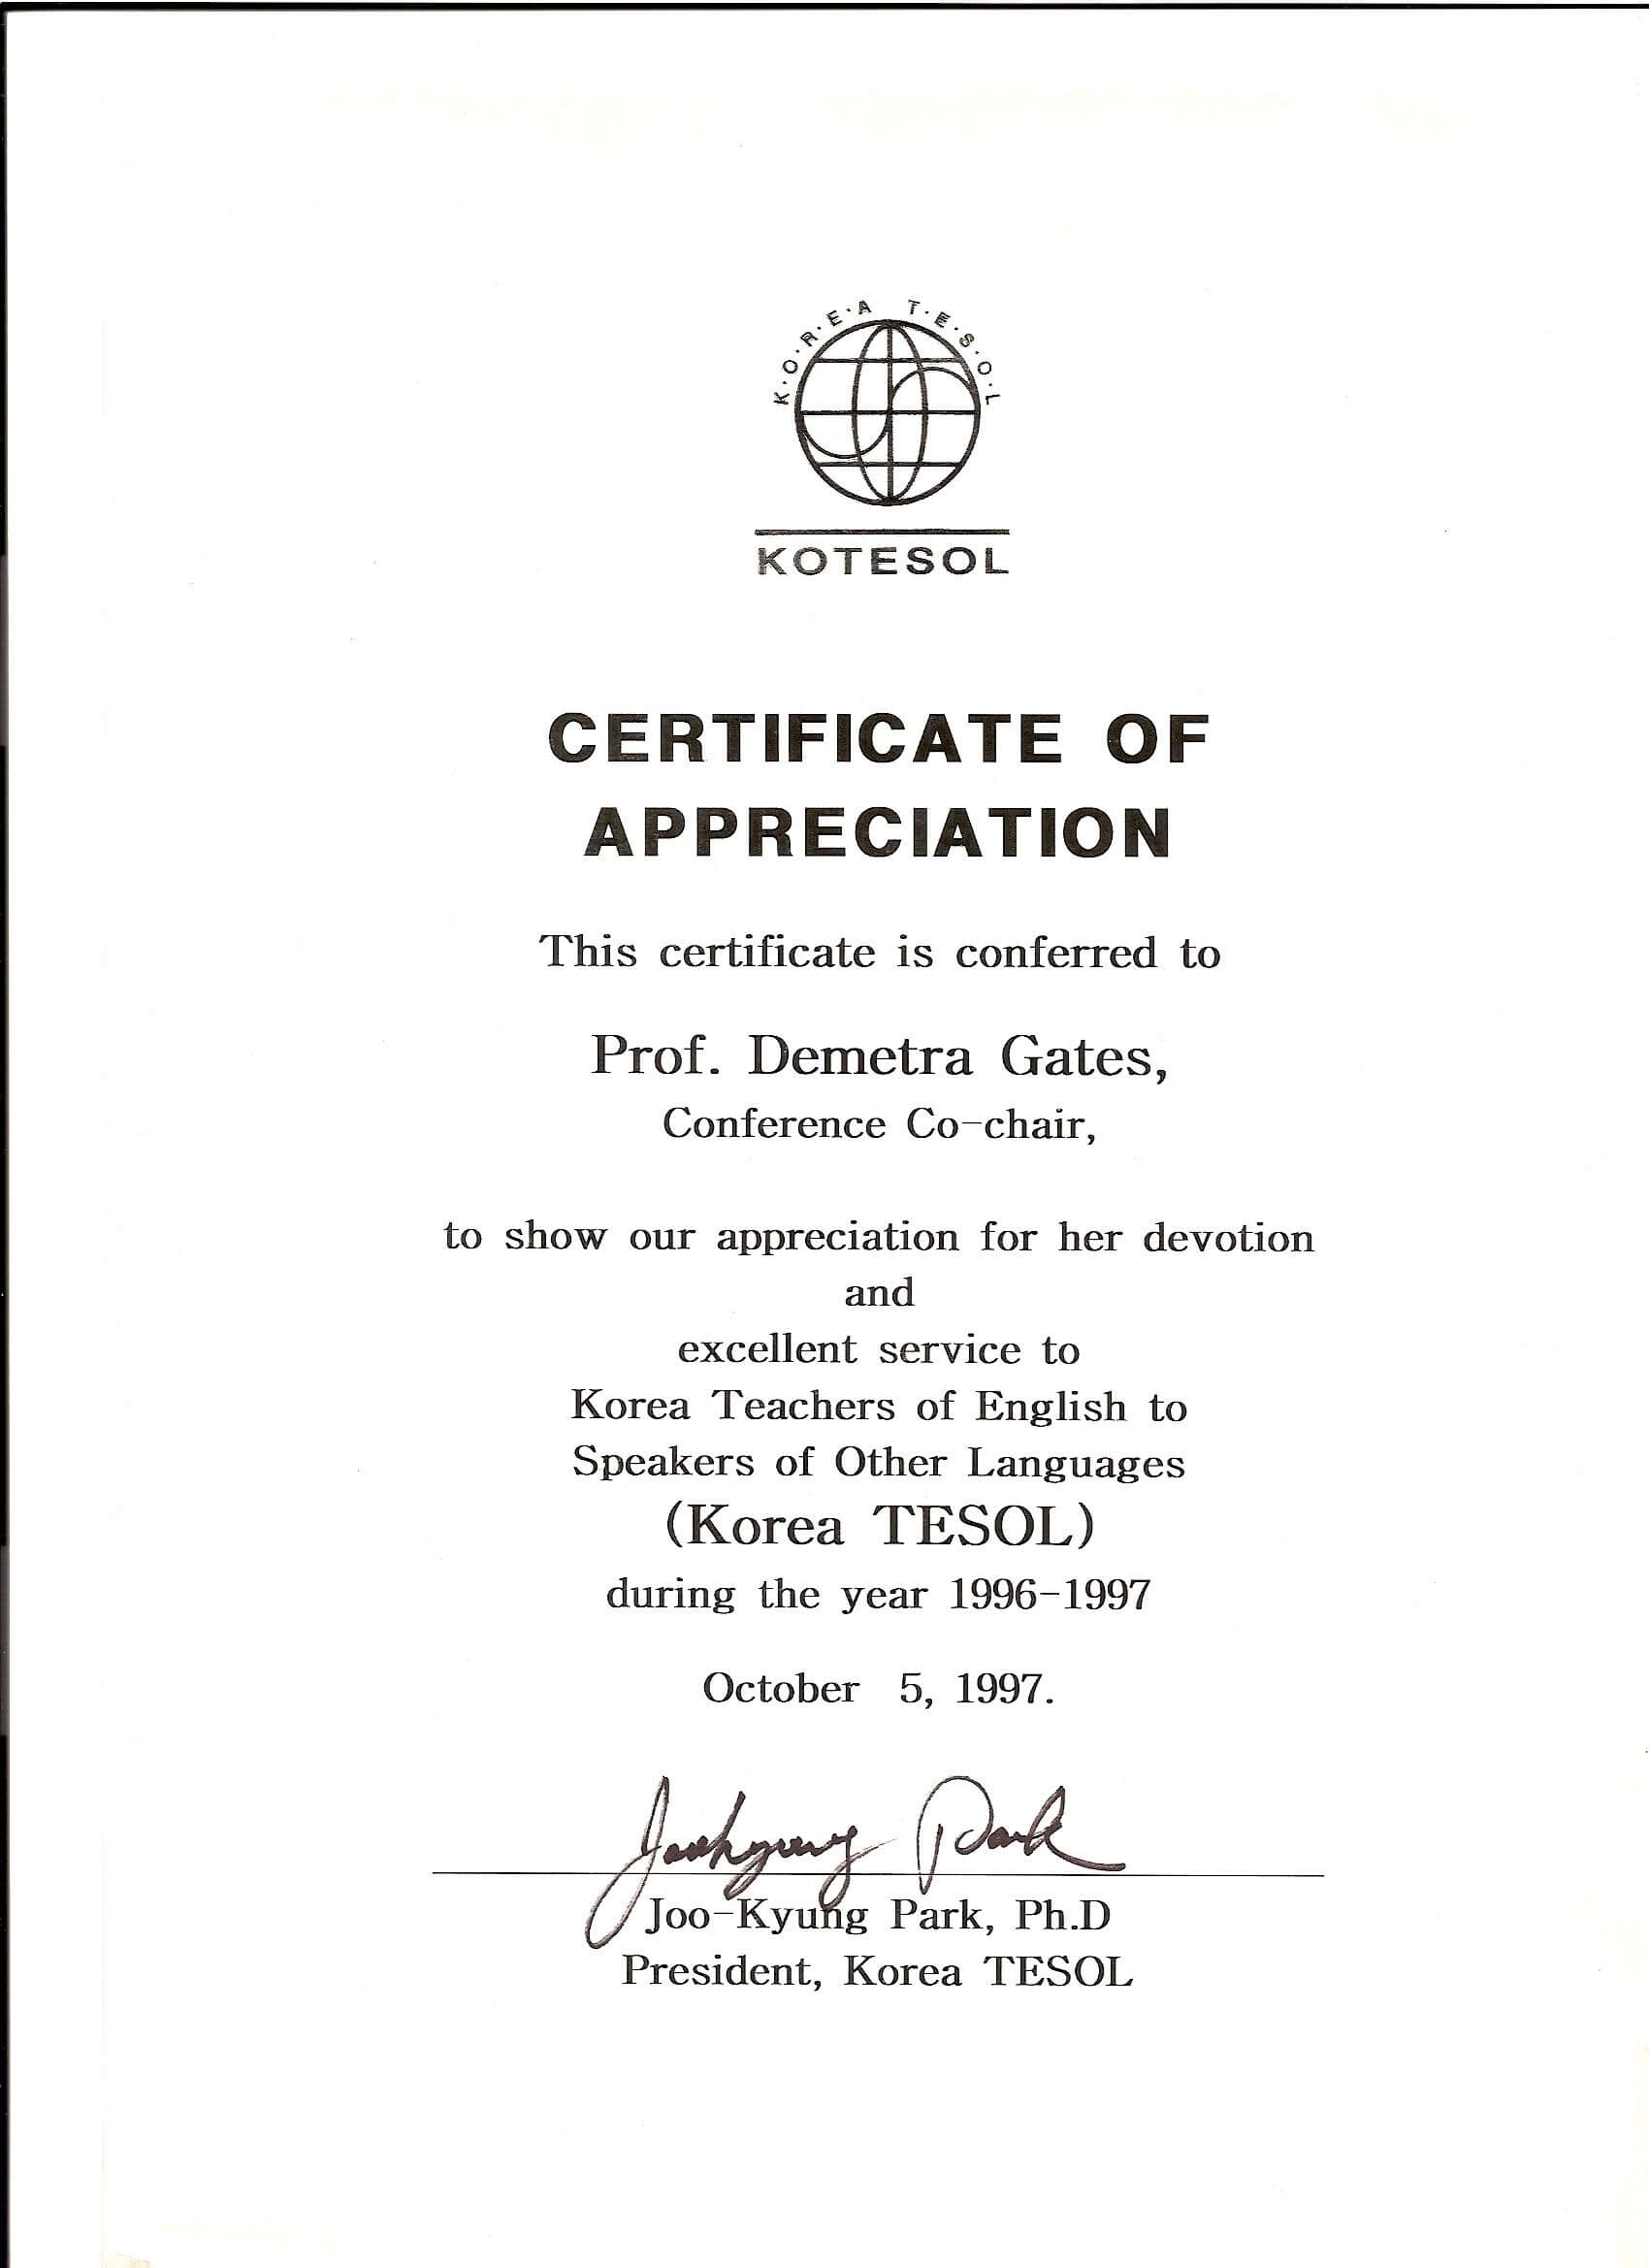 Kotesol Presidential Certificate Of Appreciation (1997 Pertaining To Army Certificate Of Completion Template